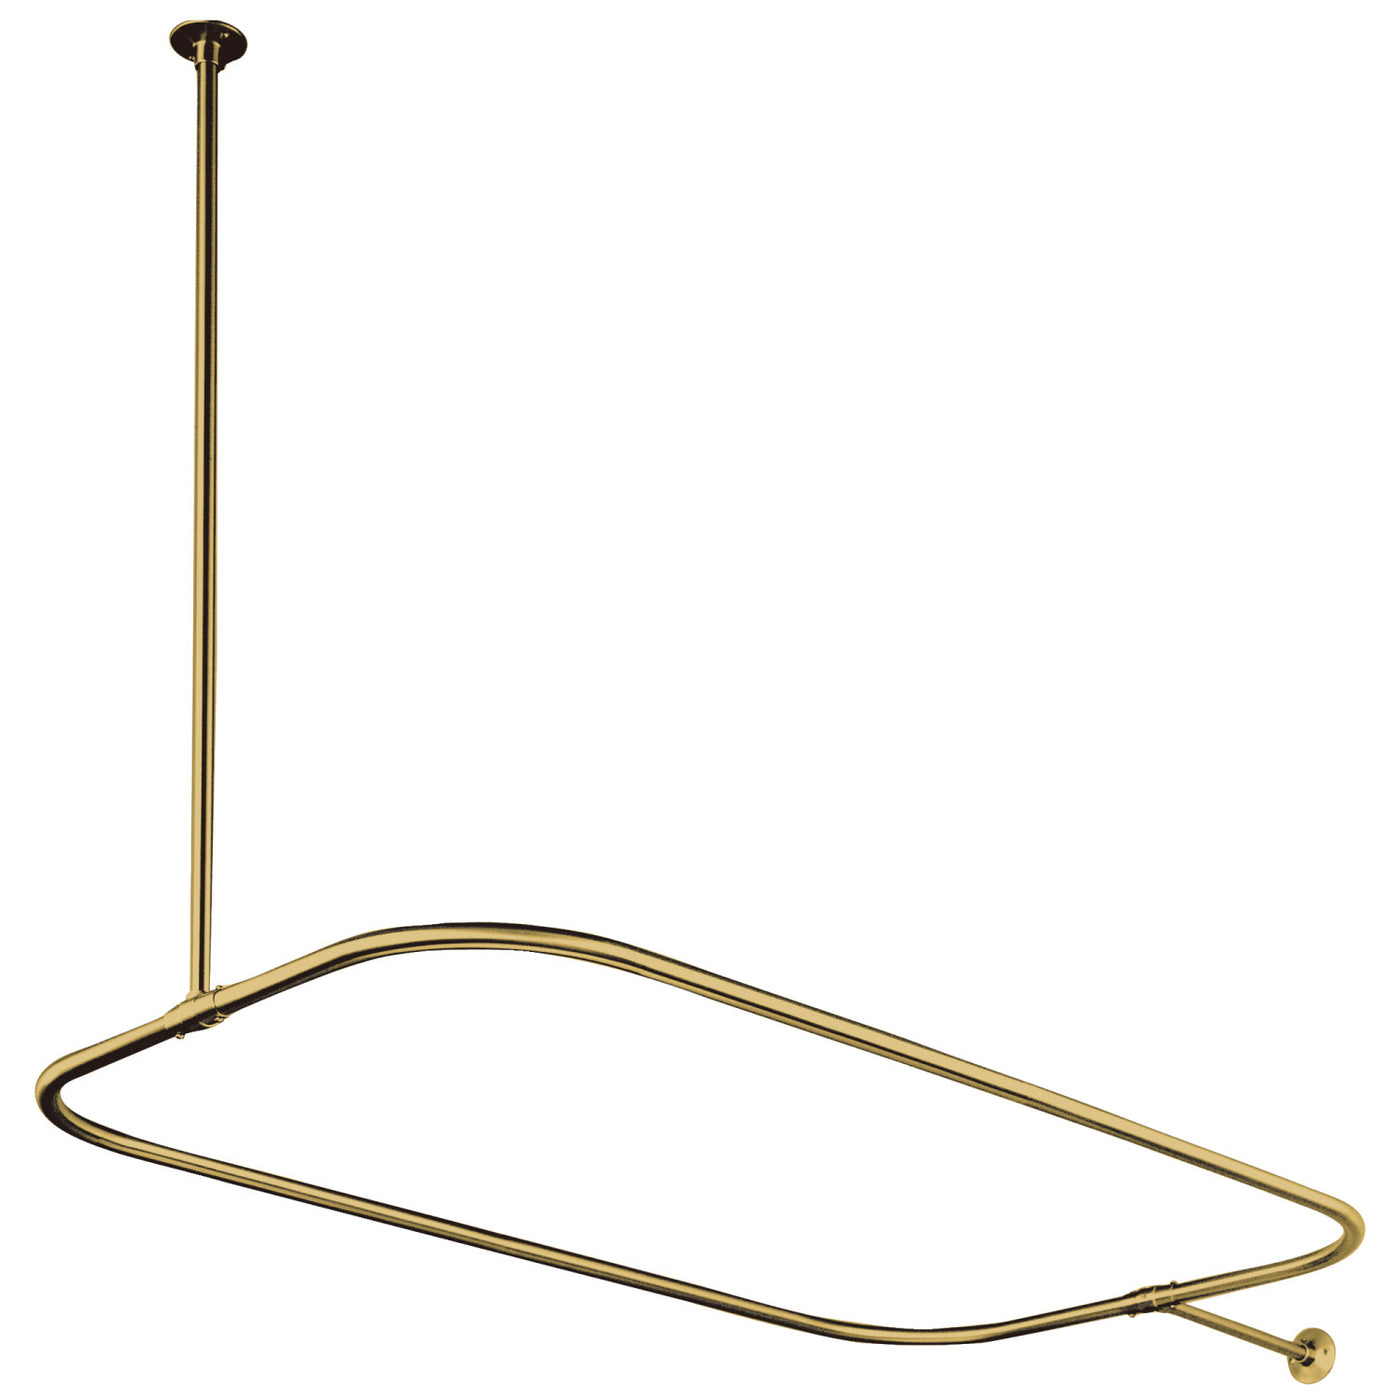 Elements of Design ED3142 L-Shaped Shower Curtain Rod, Polished Brass